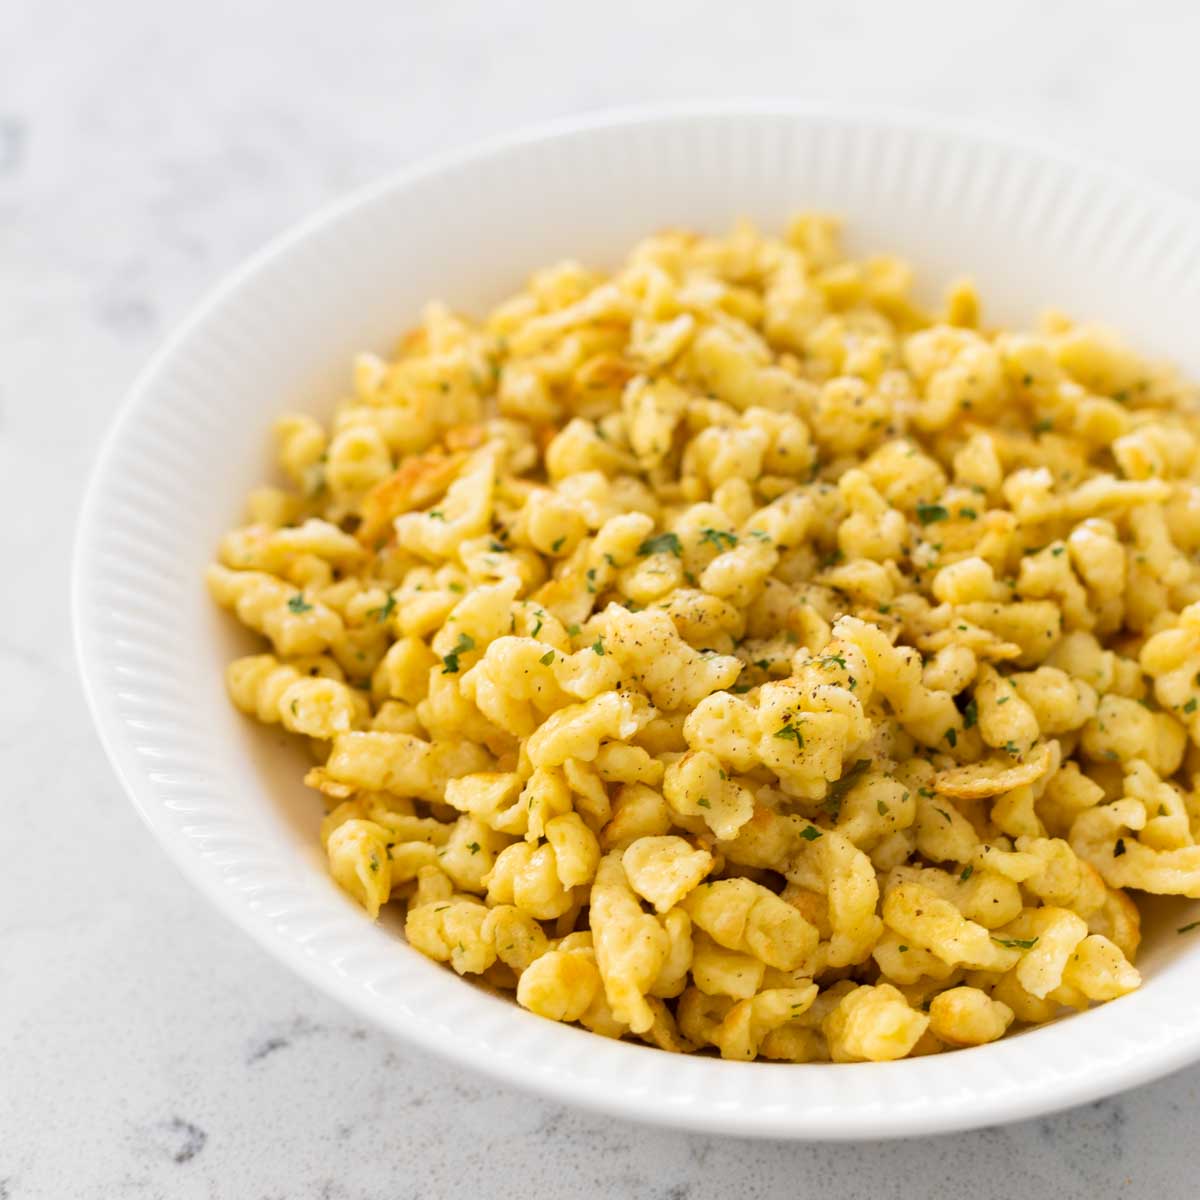 A white bowl filled with homemade spaetzle sprinkled with parsley.